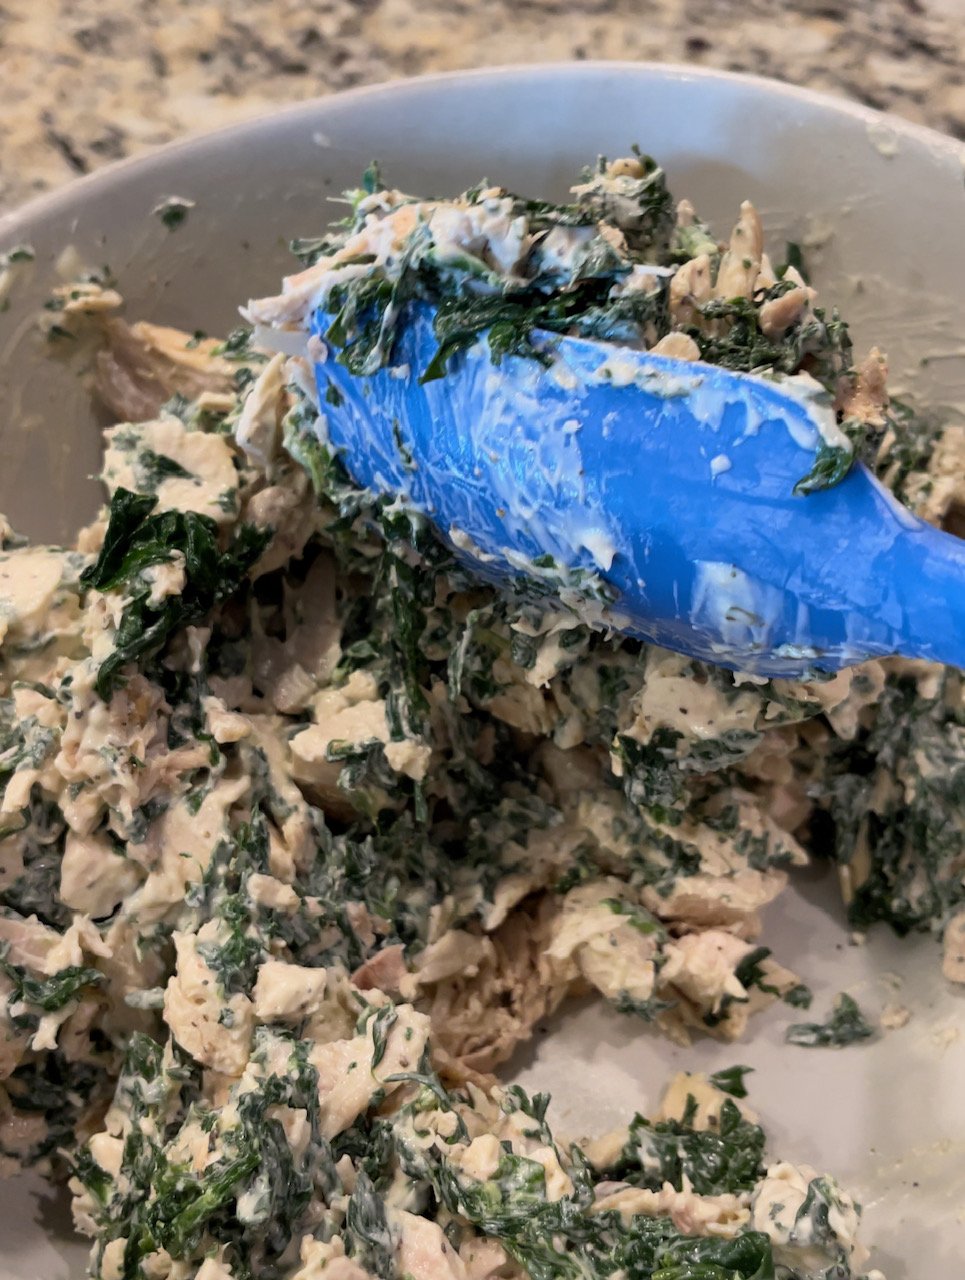 Mix the chicken, seasonings, spinach, and mayonnaise until desired consistency and taste.